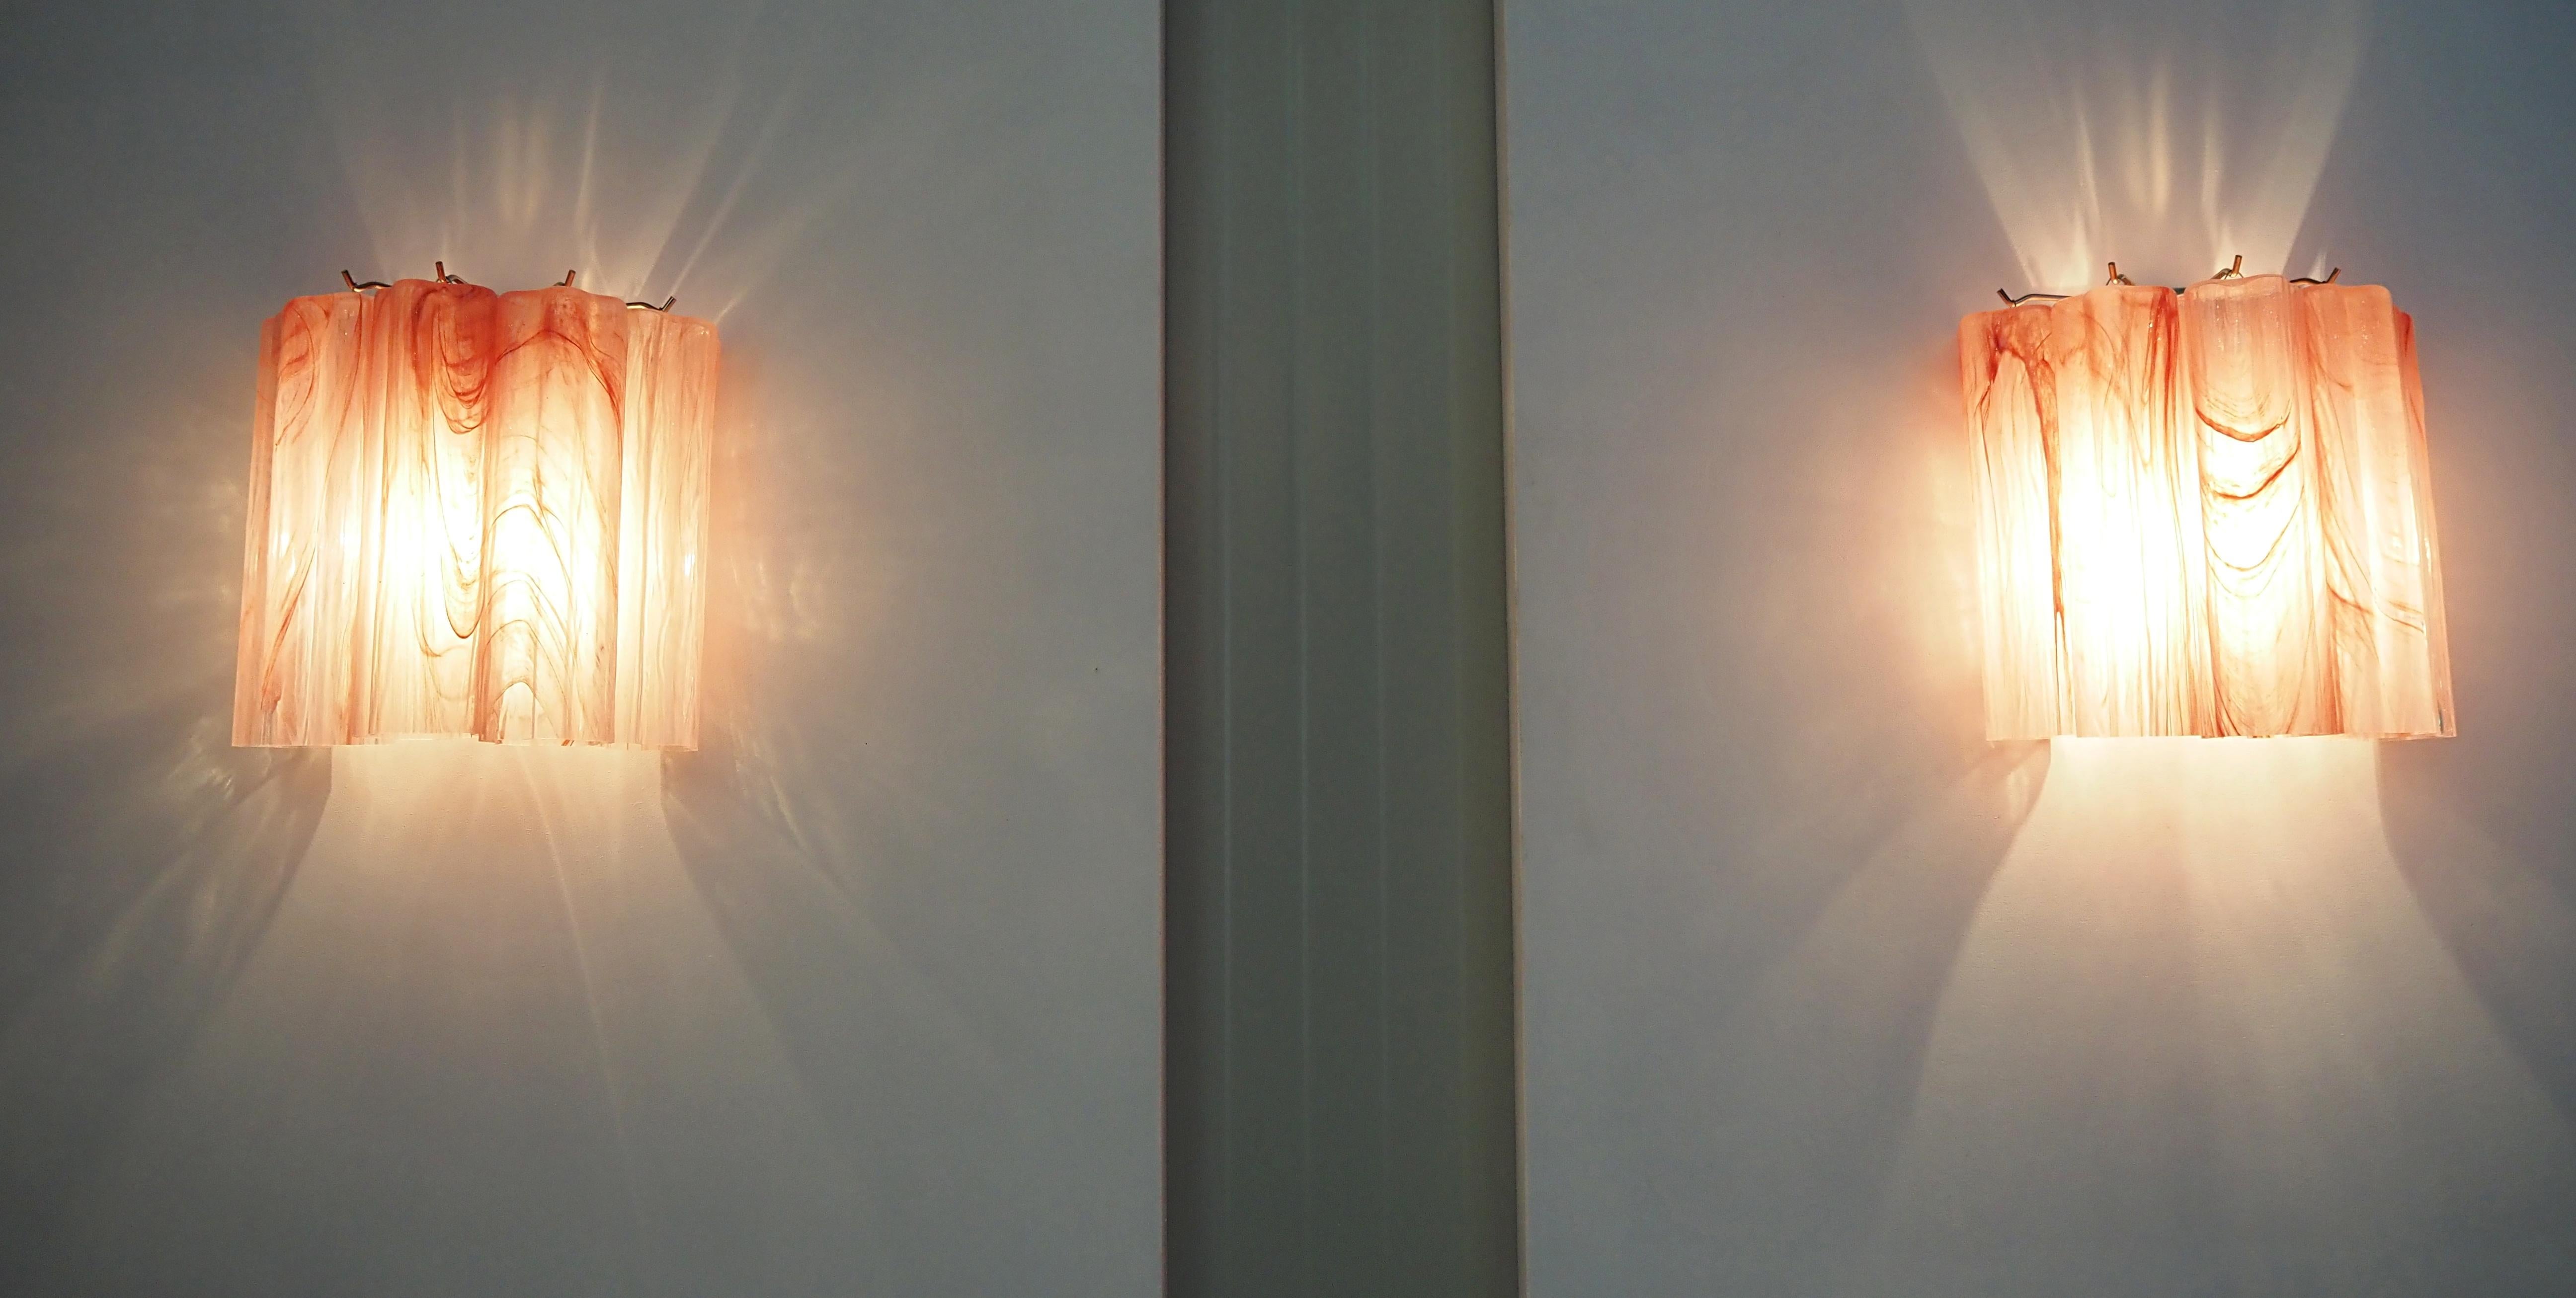 20th Century Fantastic pair of Murano Glass Tube wall sconces - 5 pink alabaster glass tube